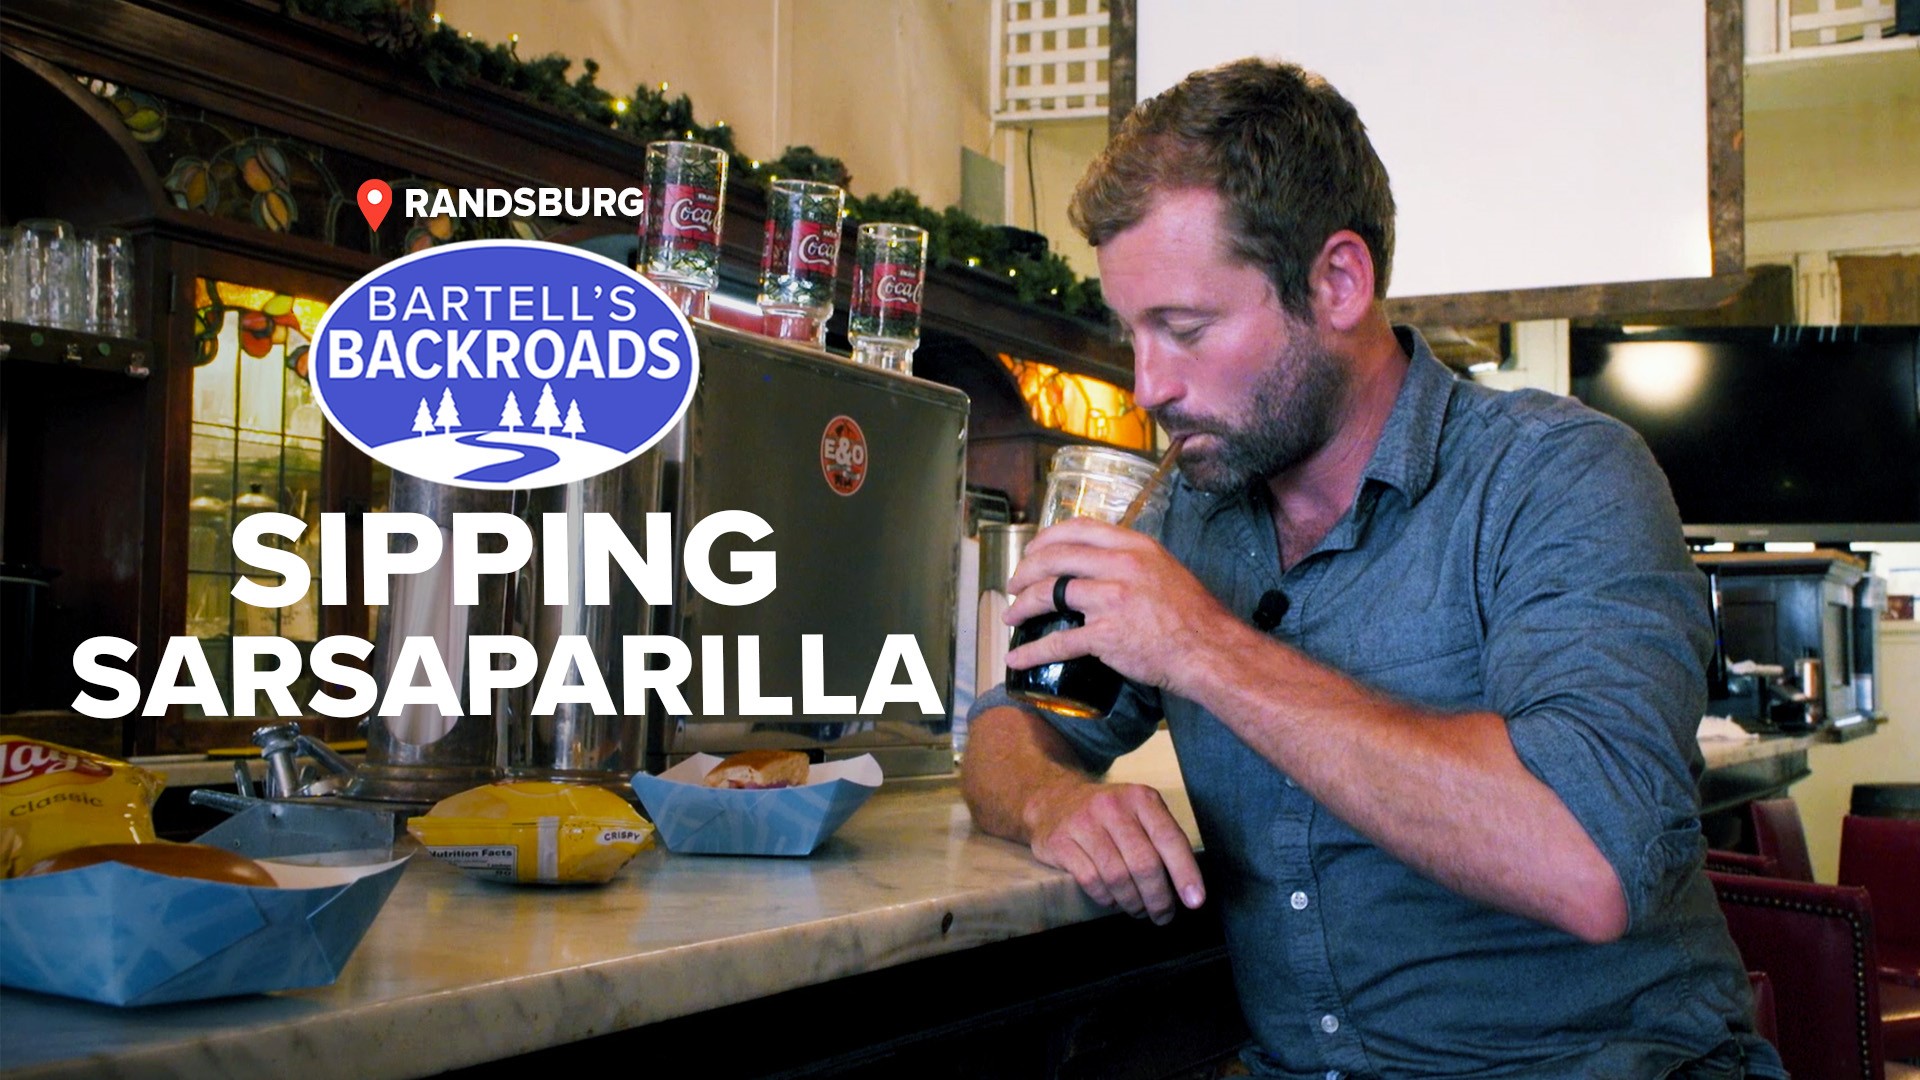 The tiny town of Randsburg has gone from desert gold mine to homemade soda oasis.